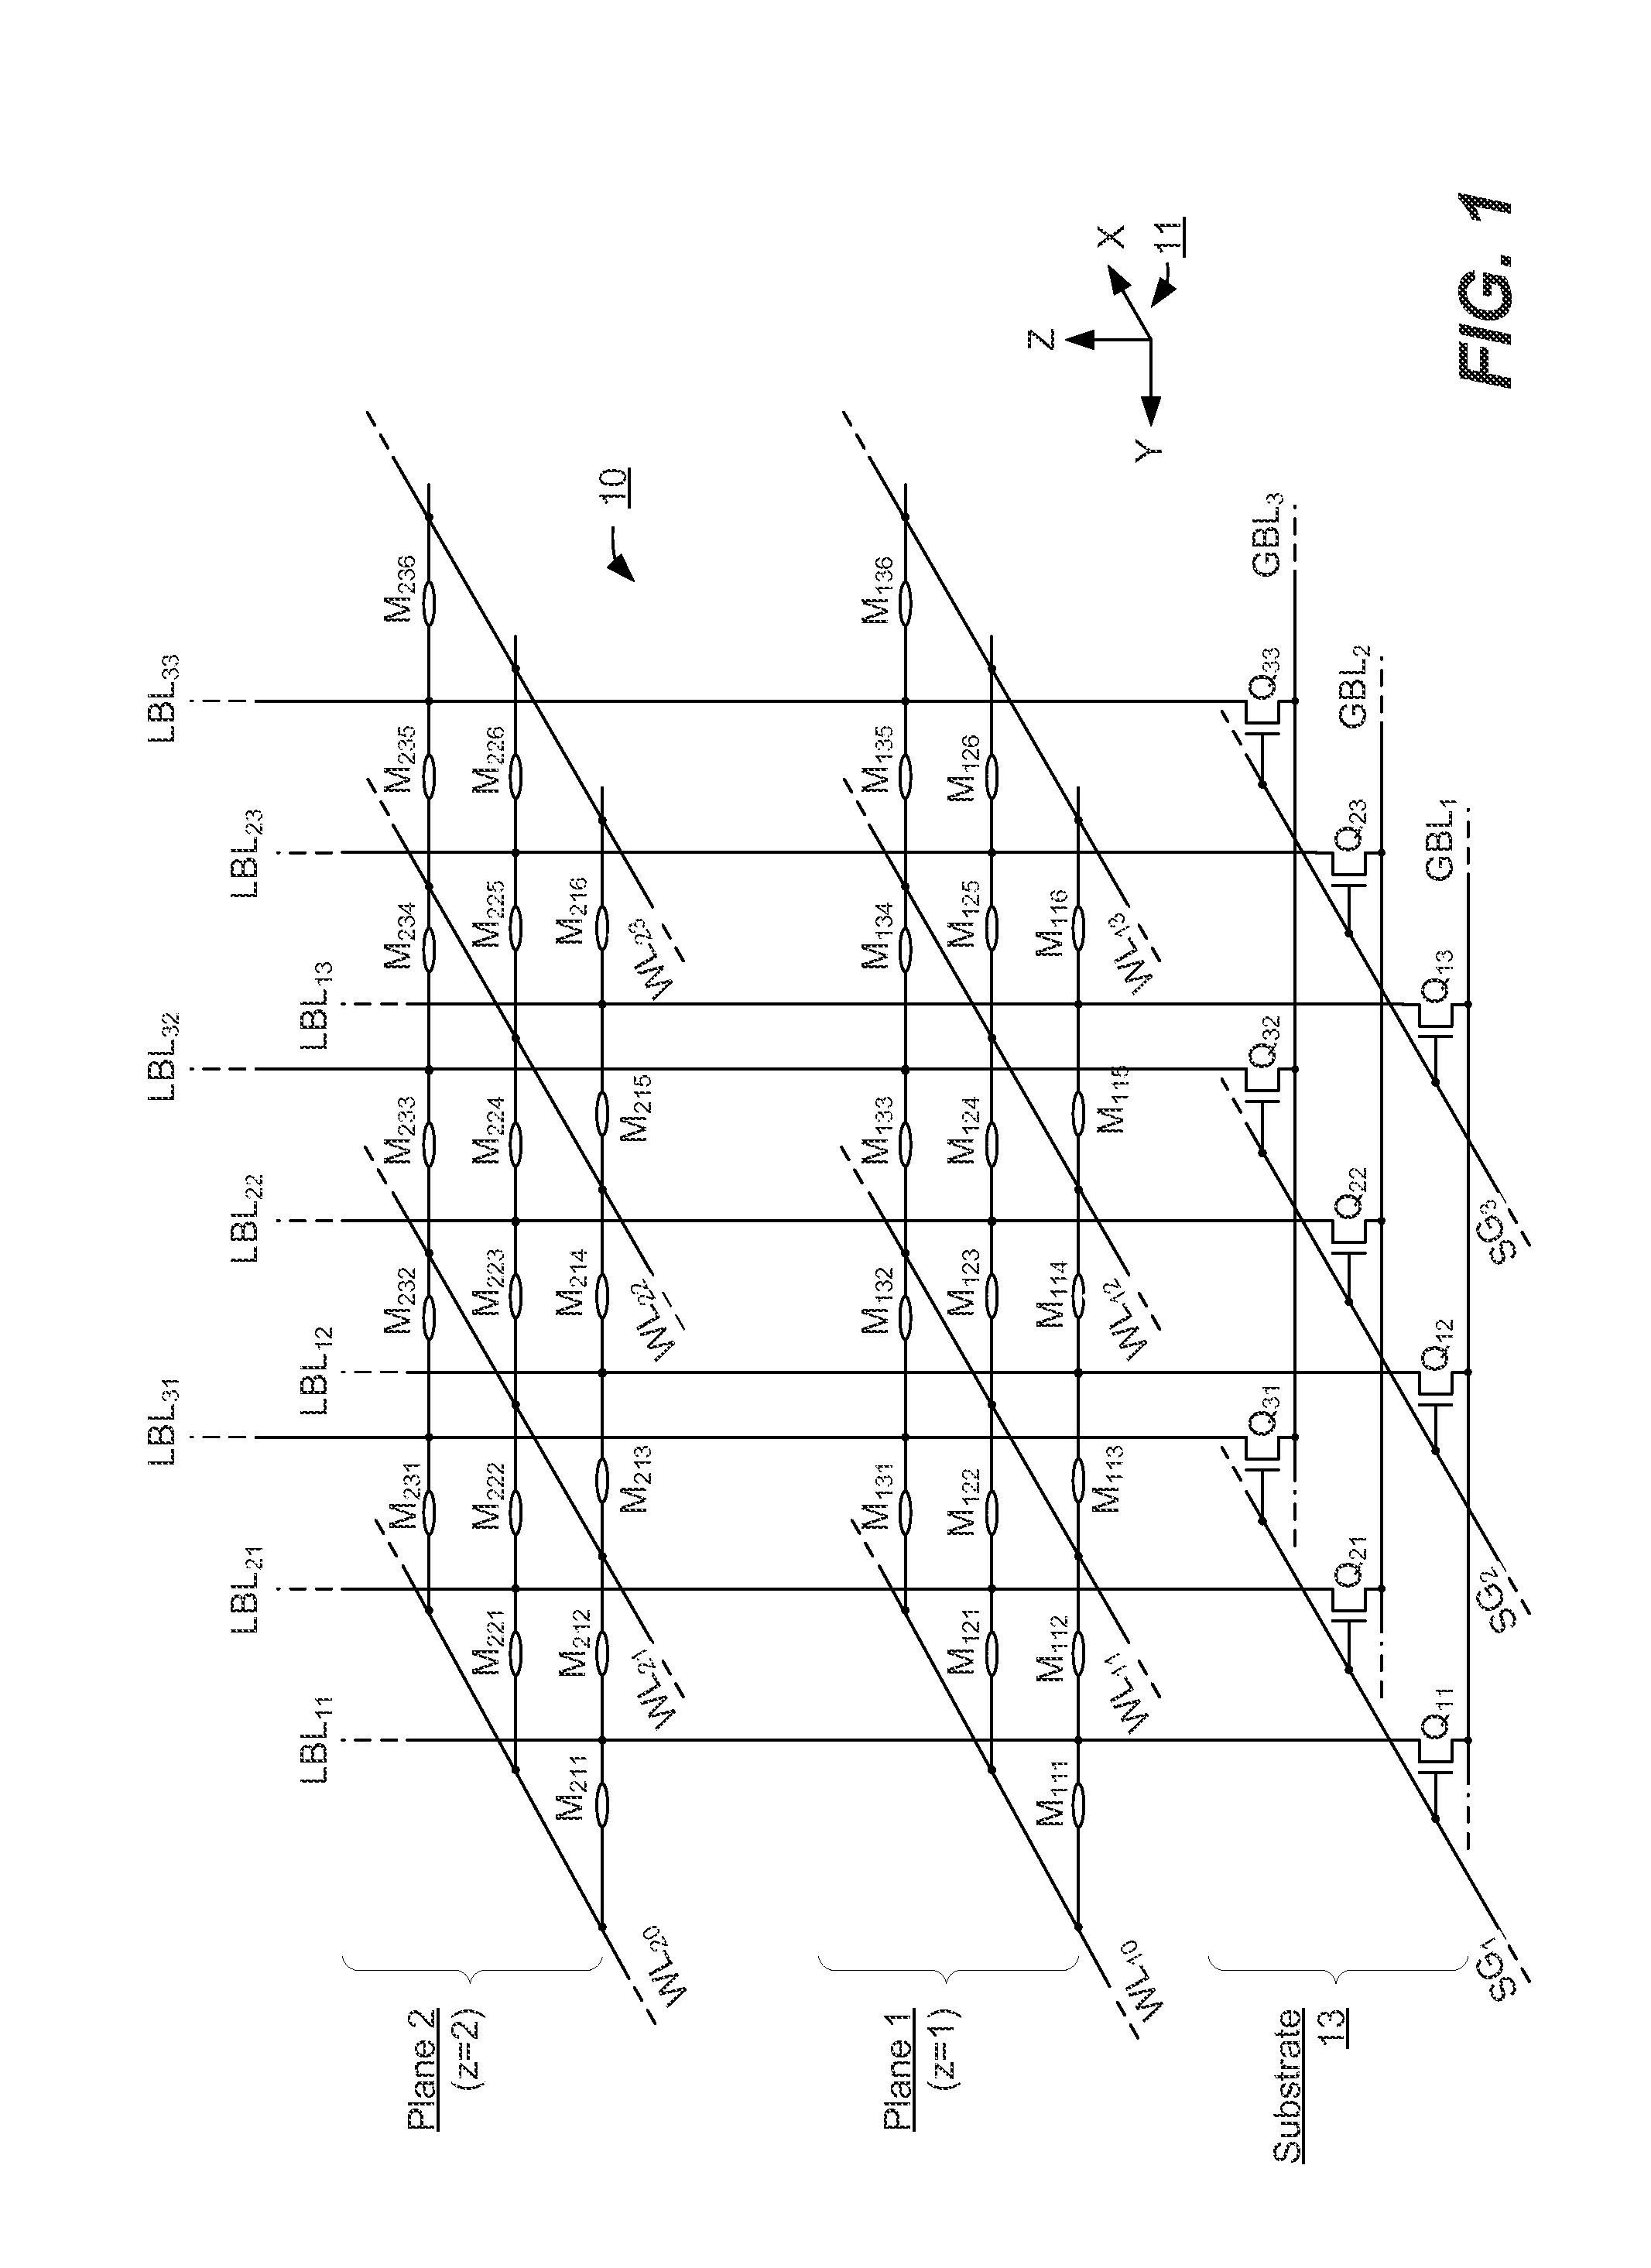 Differential current sense amplifier and method for non-volatile memory